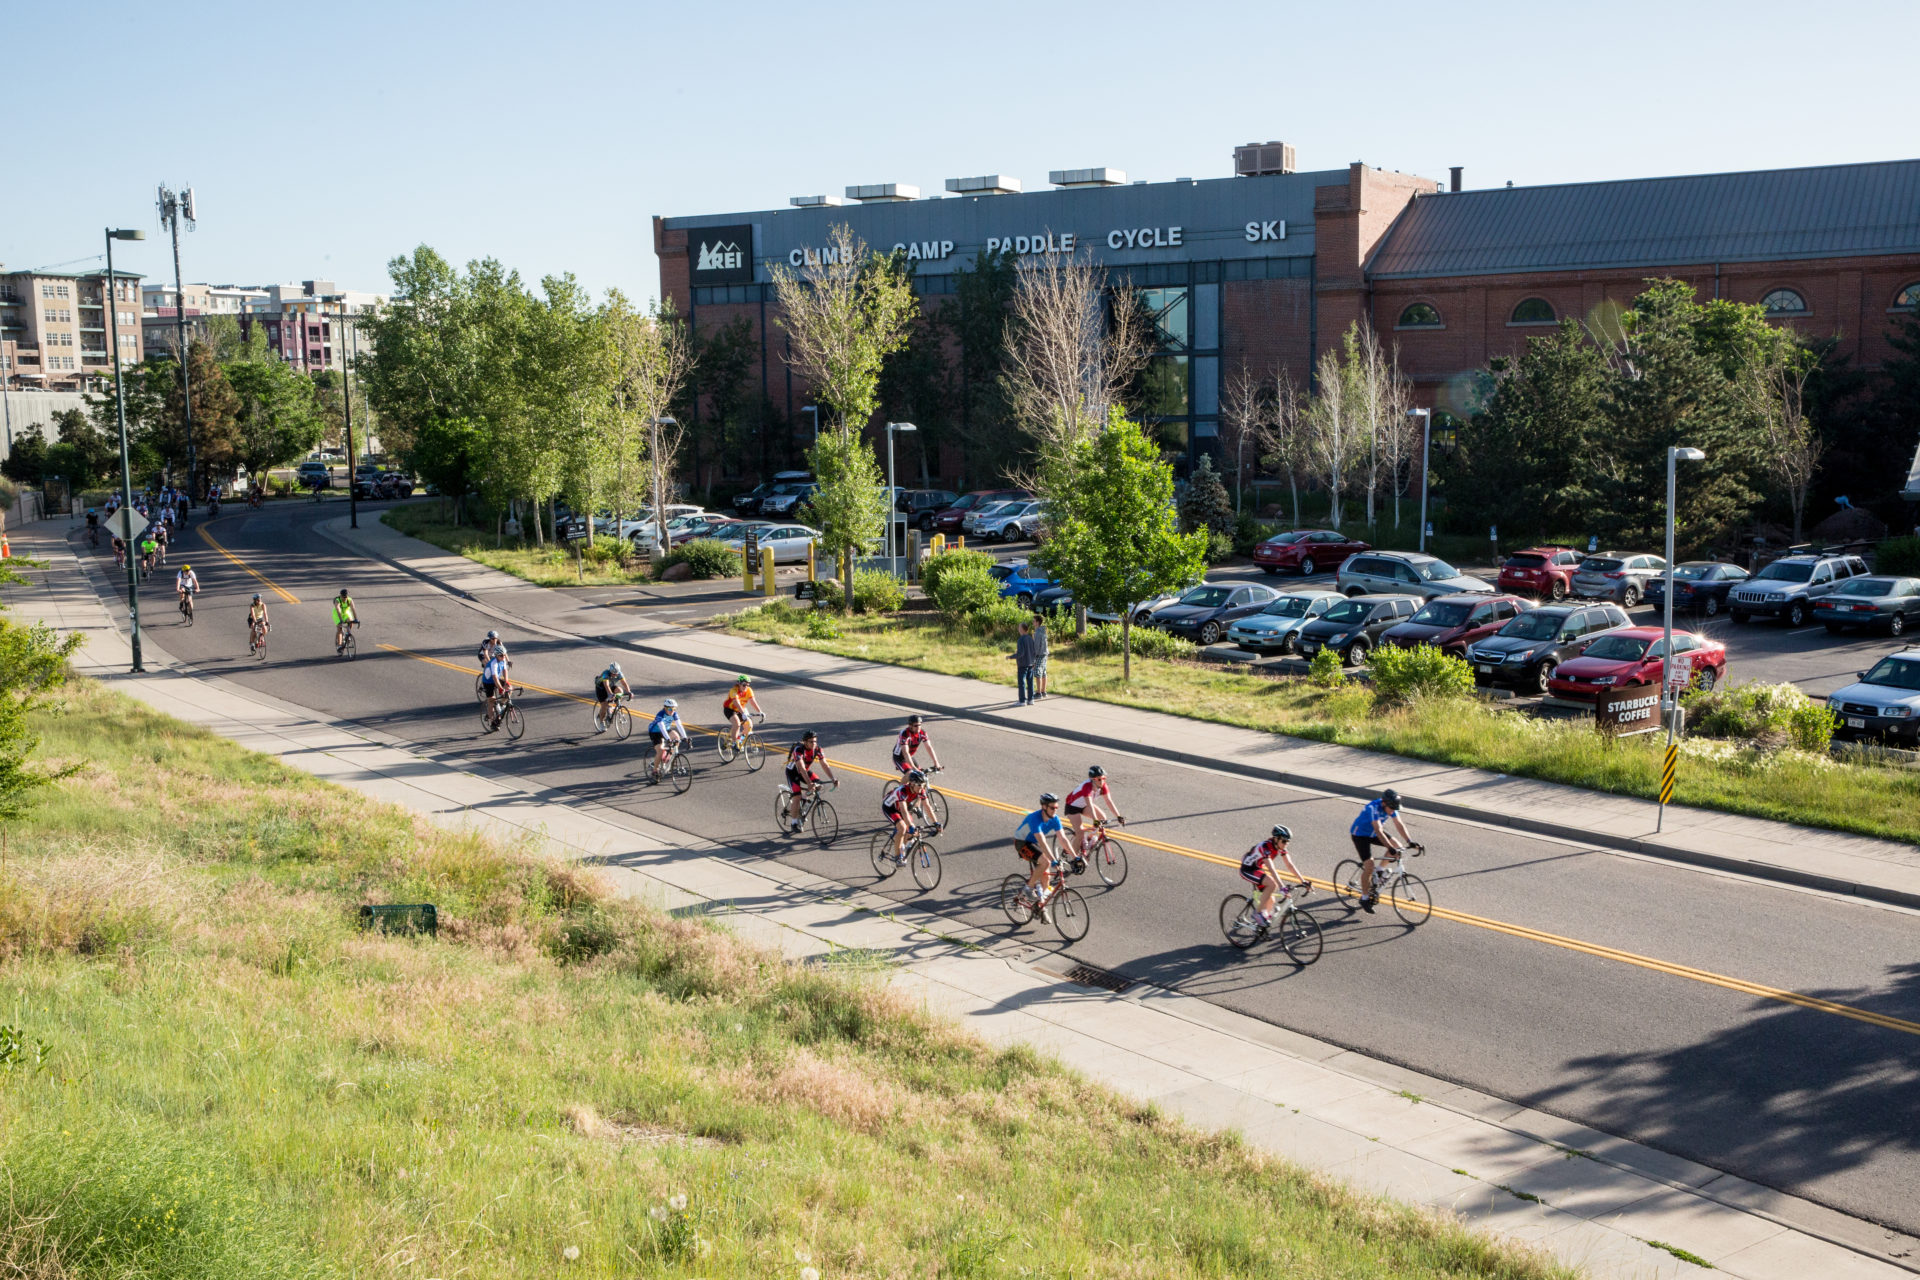 A group of people ride bikes on a paved road. There is an REI store in the background.